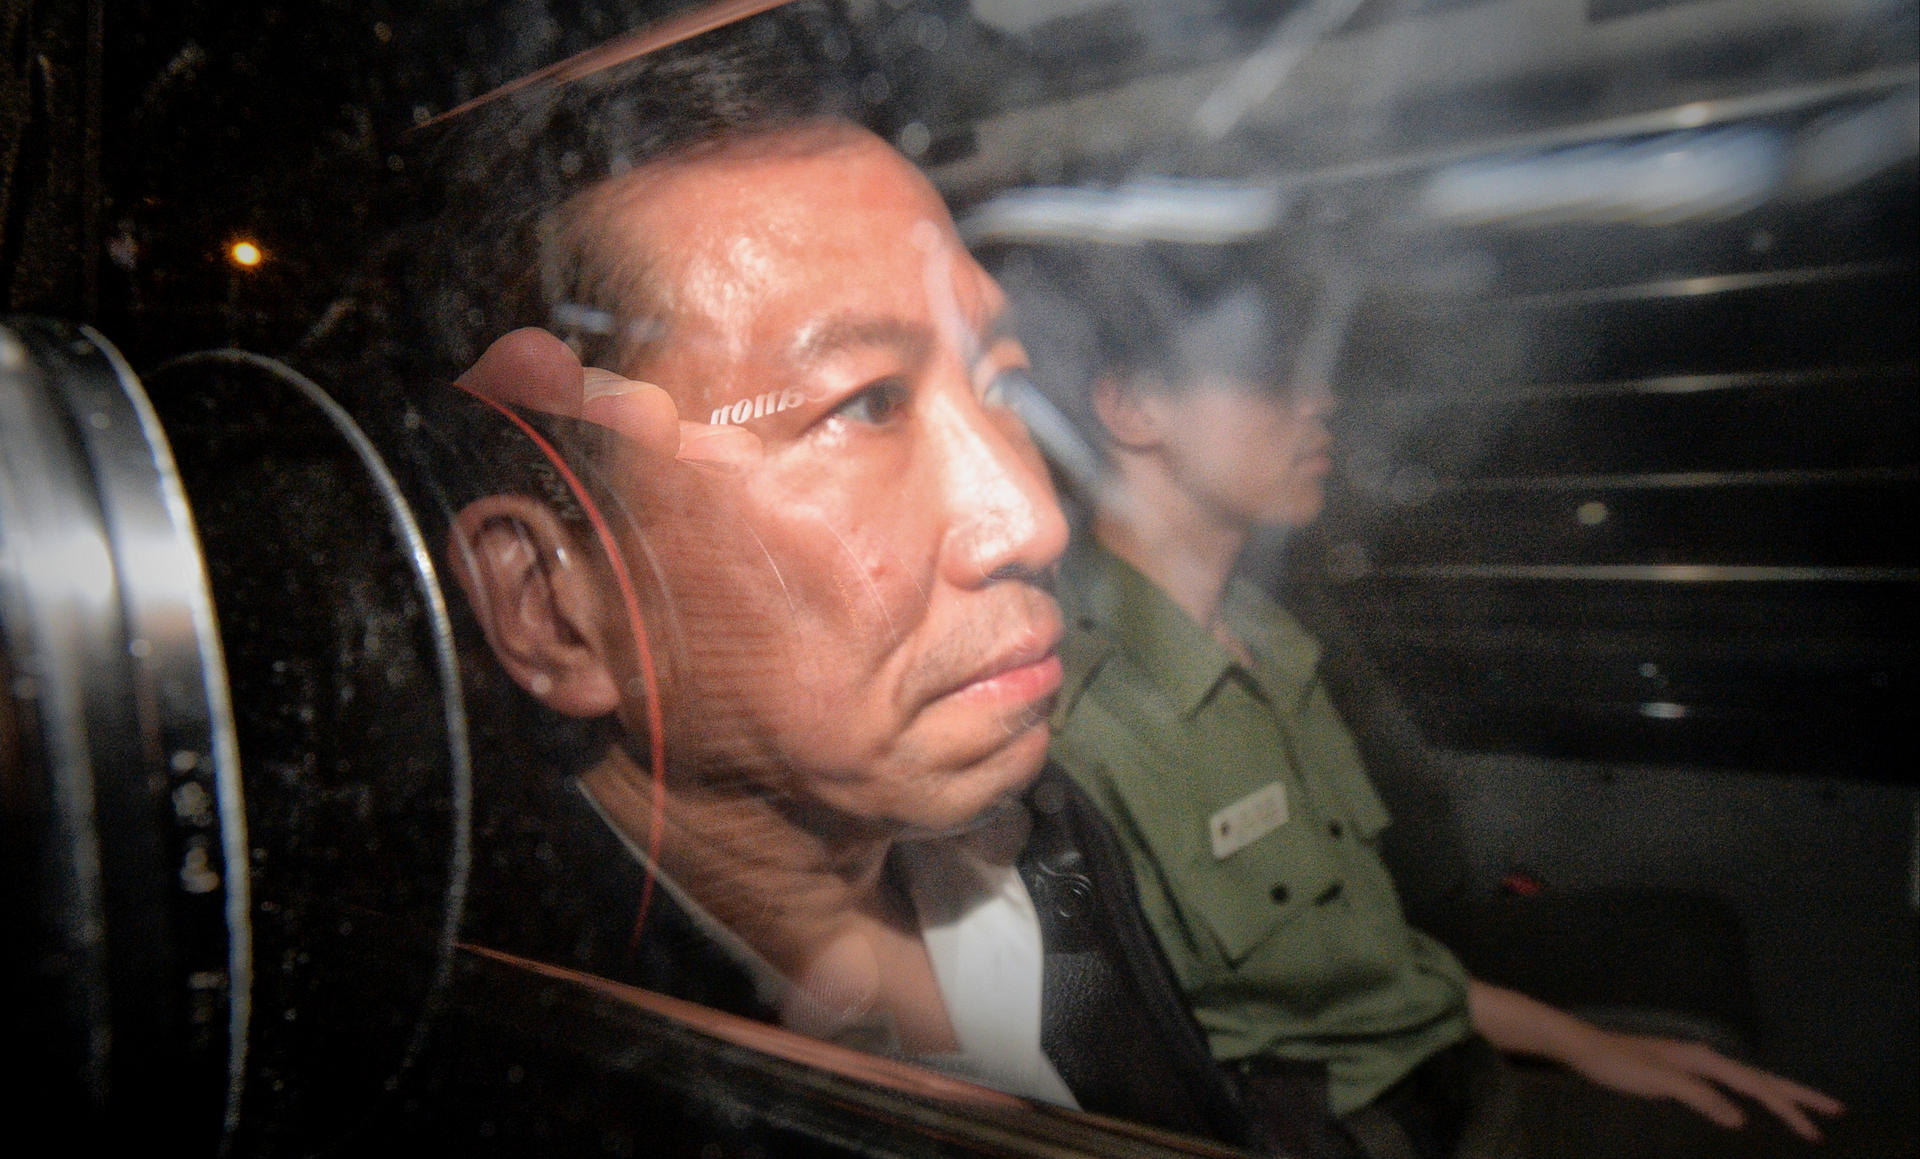 Peter Chan being escorted from court. Photo: SCMP 